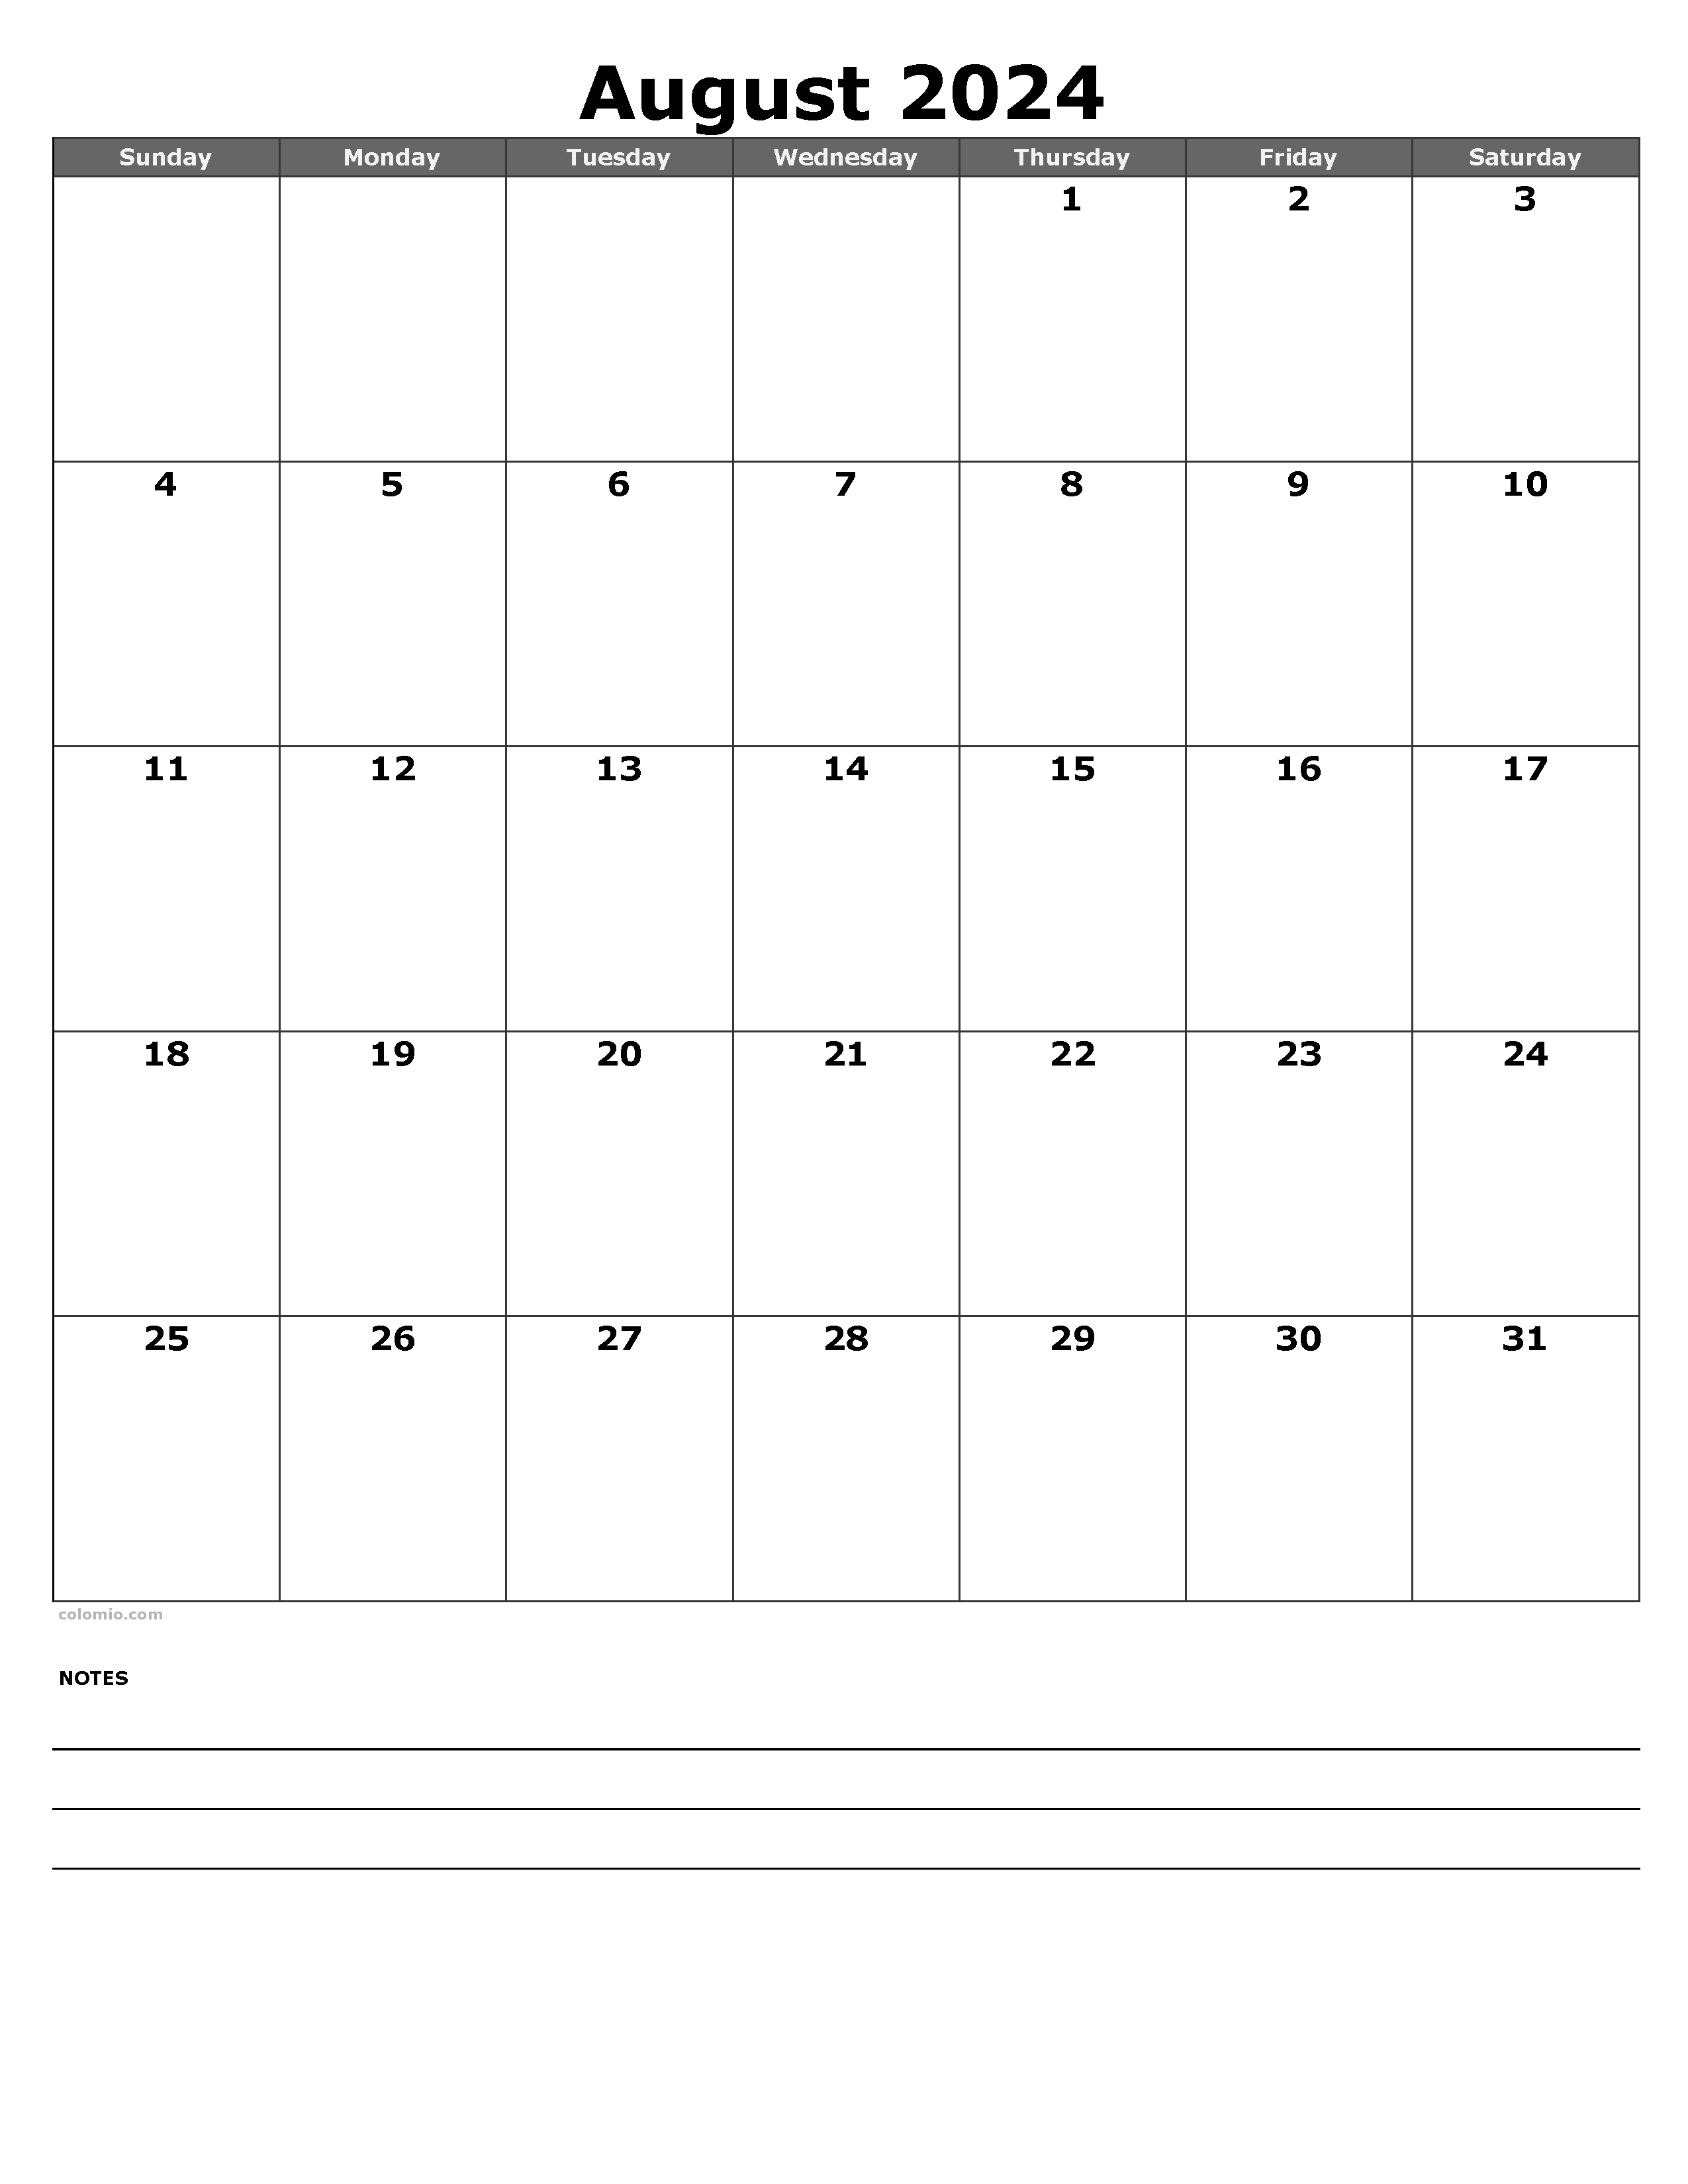 August 2024 Calendar | Free Printable Pdf, Xls And Png pertaining to Free Printable August 2024 Calendar Portrait